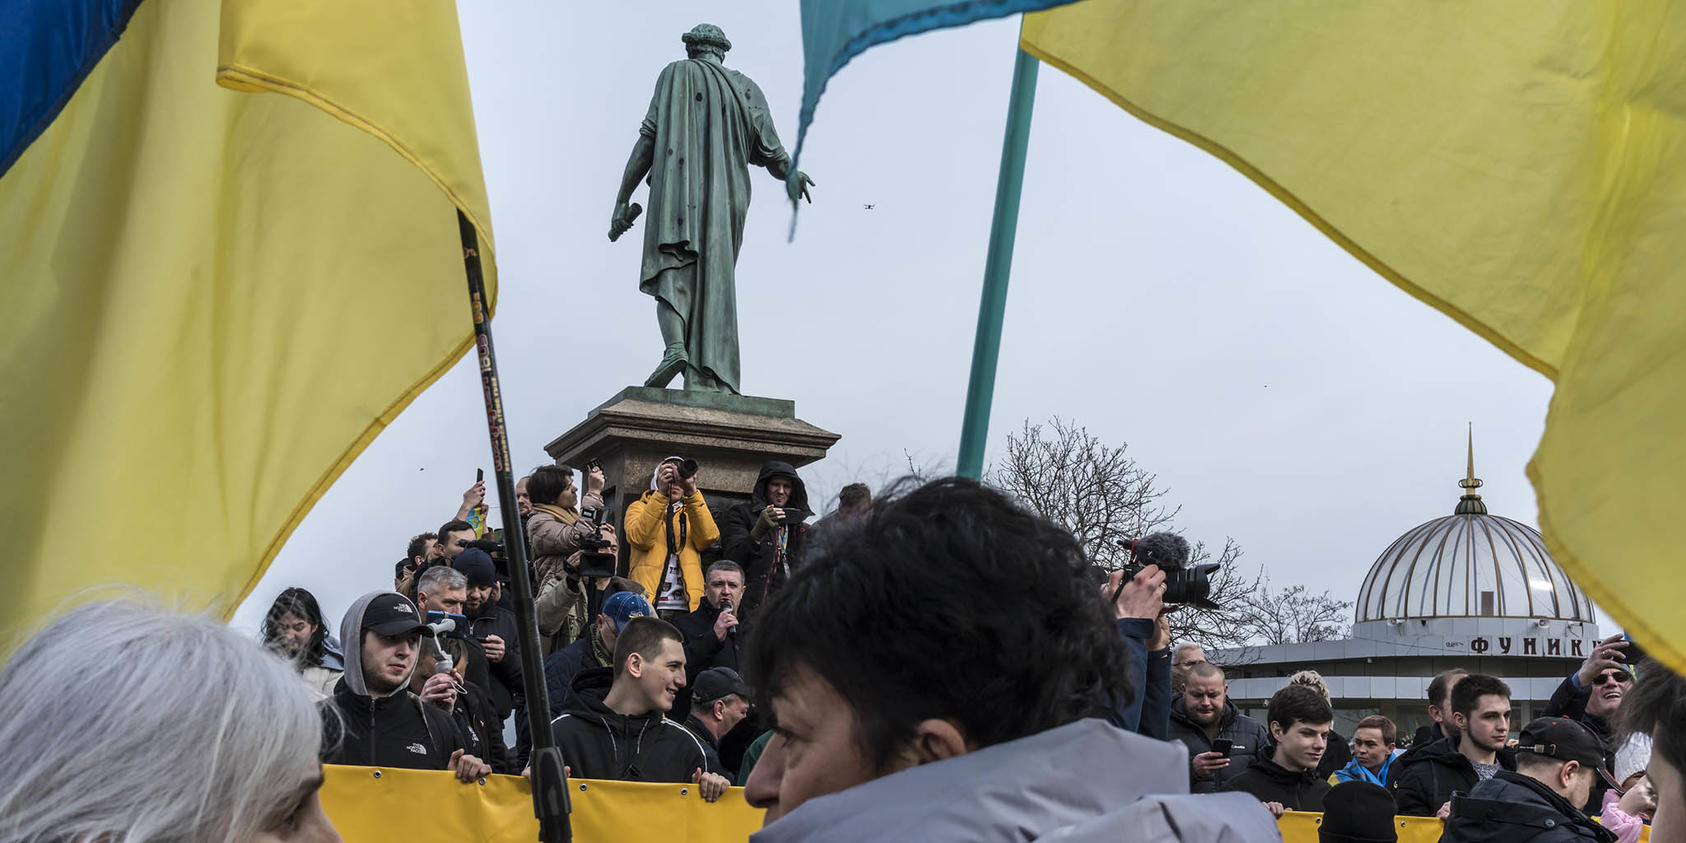 Ukrainian demonstrators march in the port of Odessa, four days before Russia’s new invasion in February, to renew demands for democratic, transparent governance from Ukraine’s Euromaidan uprising eight years earlier. (Brendan Hoffman/The New York Times)